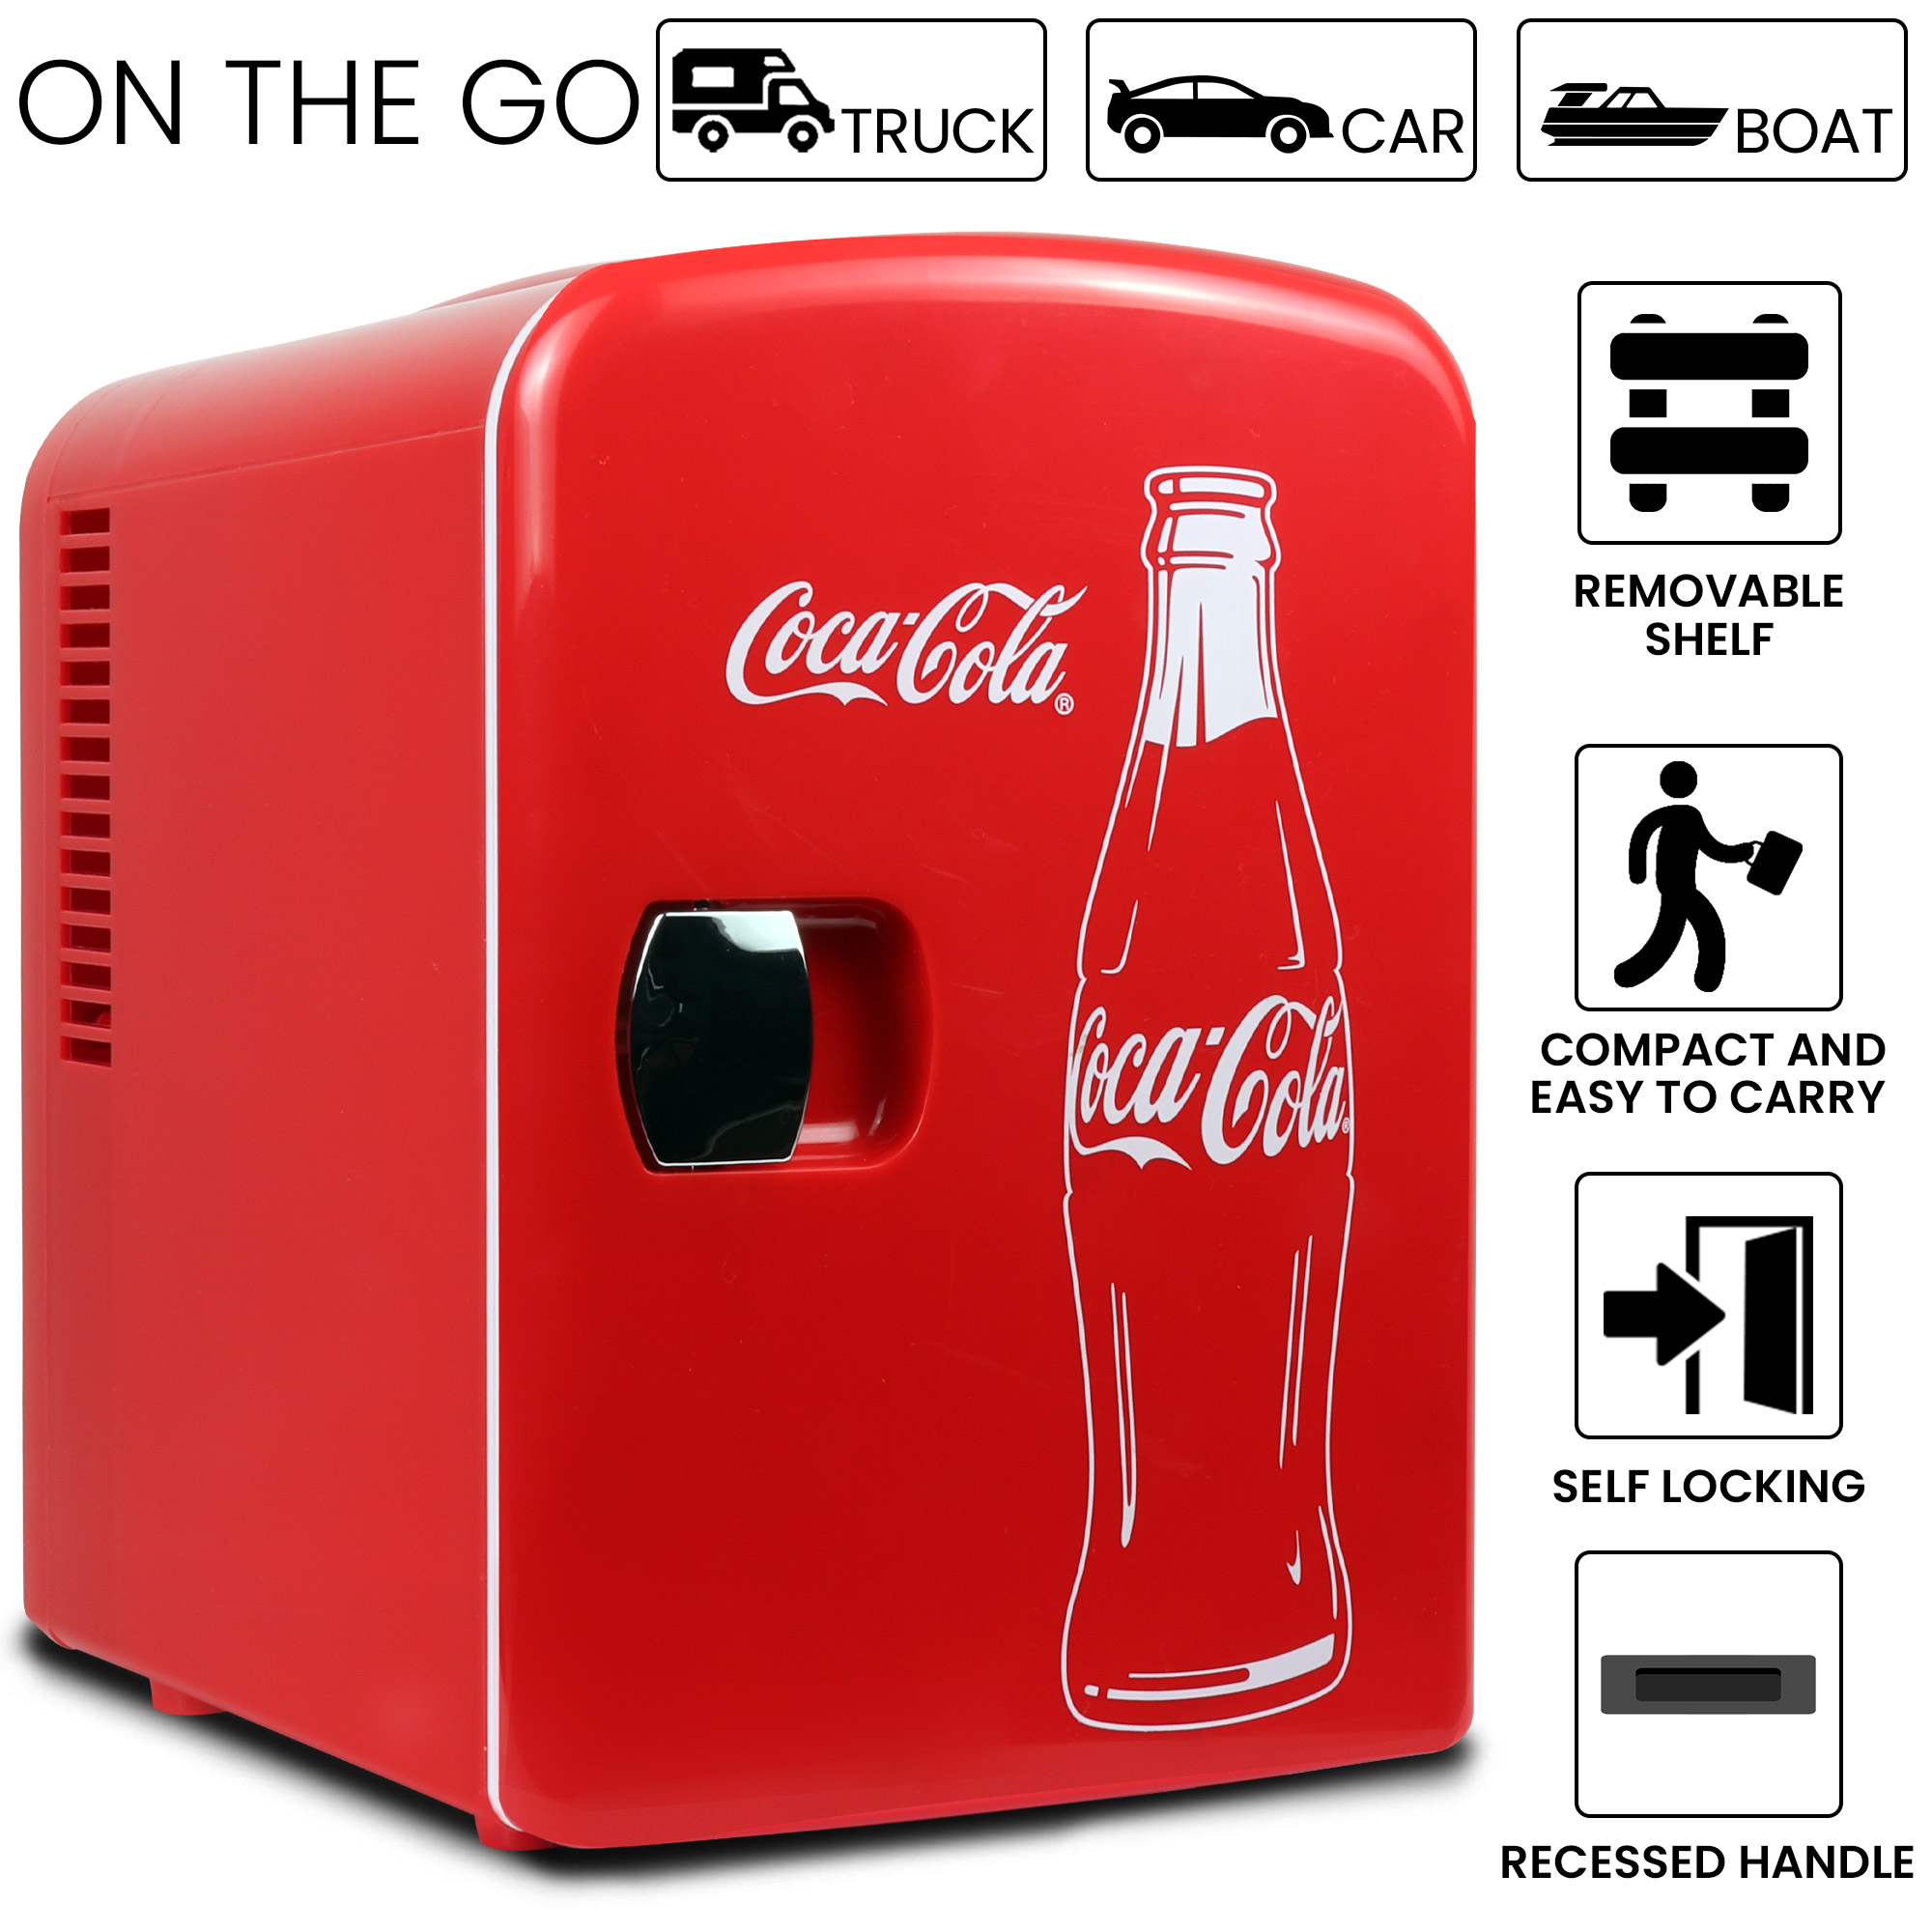 Coca-Cola Classic 4L Mini Fridge w/ 12V DC and 110V AC Cords, 6 Can Portable Cooler, Personal Travel Refrigerator for Snacks Lunch Drinks Cosmetics, Desk Home Office Dorm, Red - image 4 of 8